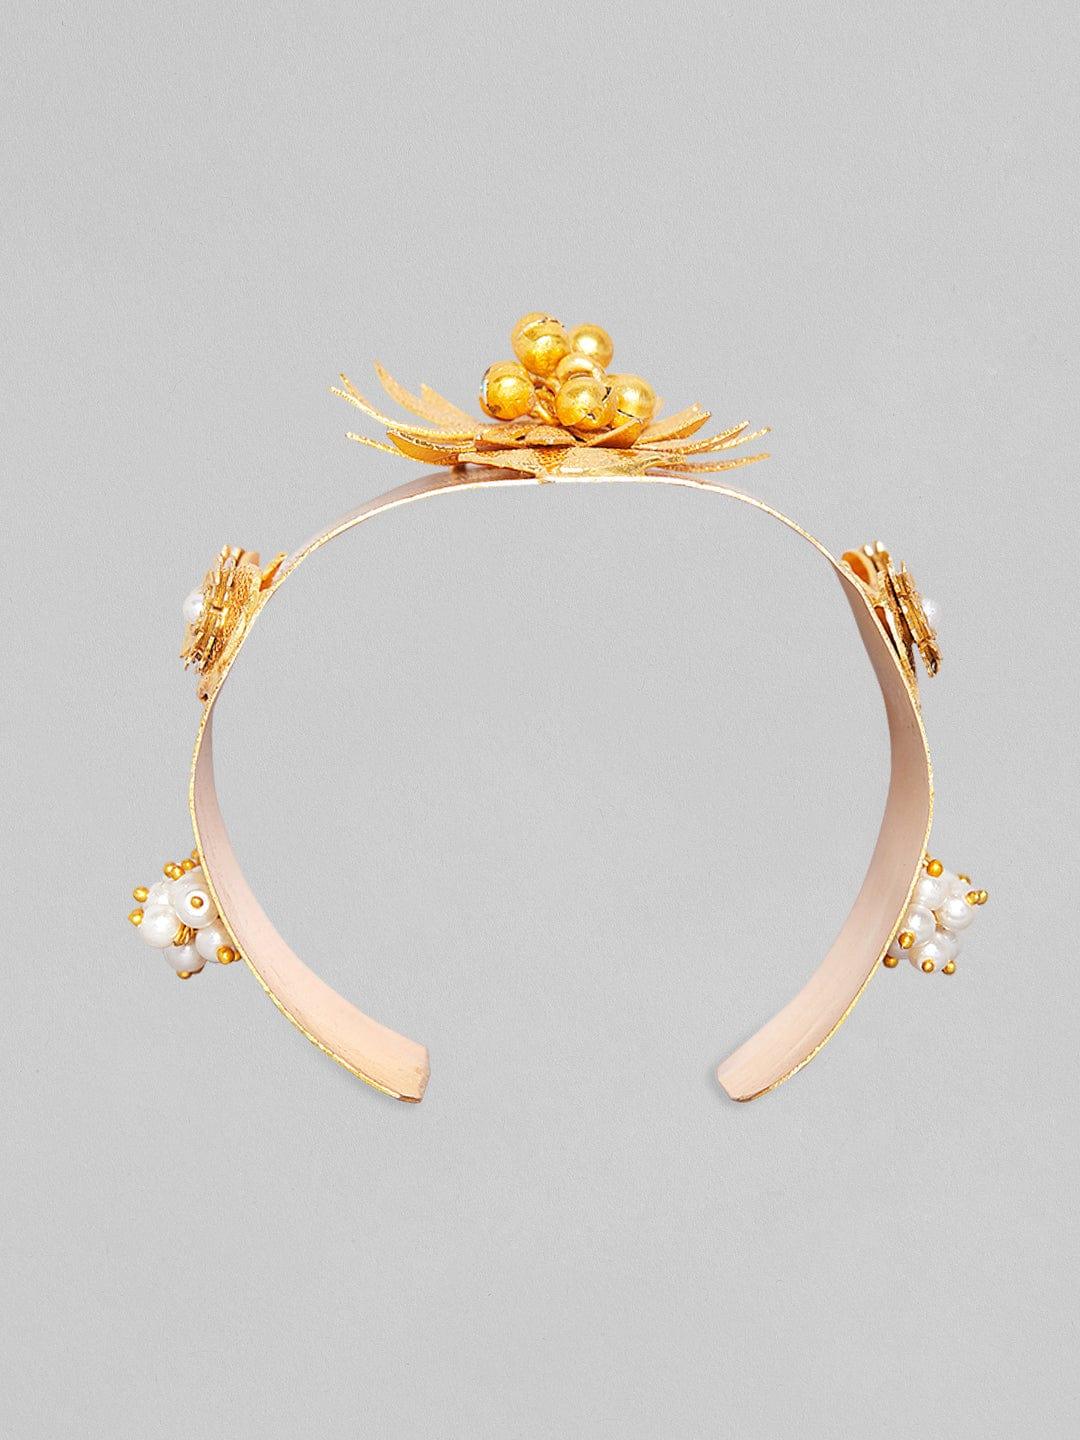 Rubans 24K gold plated Handcrafted Broad Handcuff With Floral Design And Golden Beads - Indiakreations